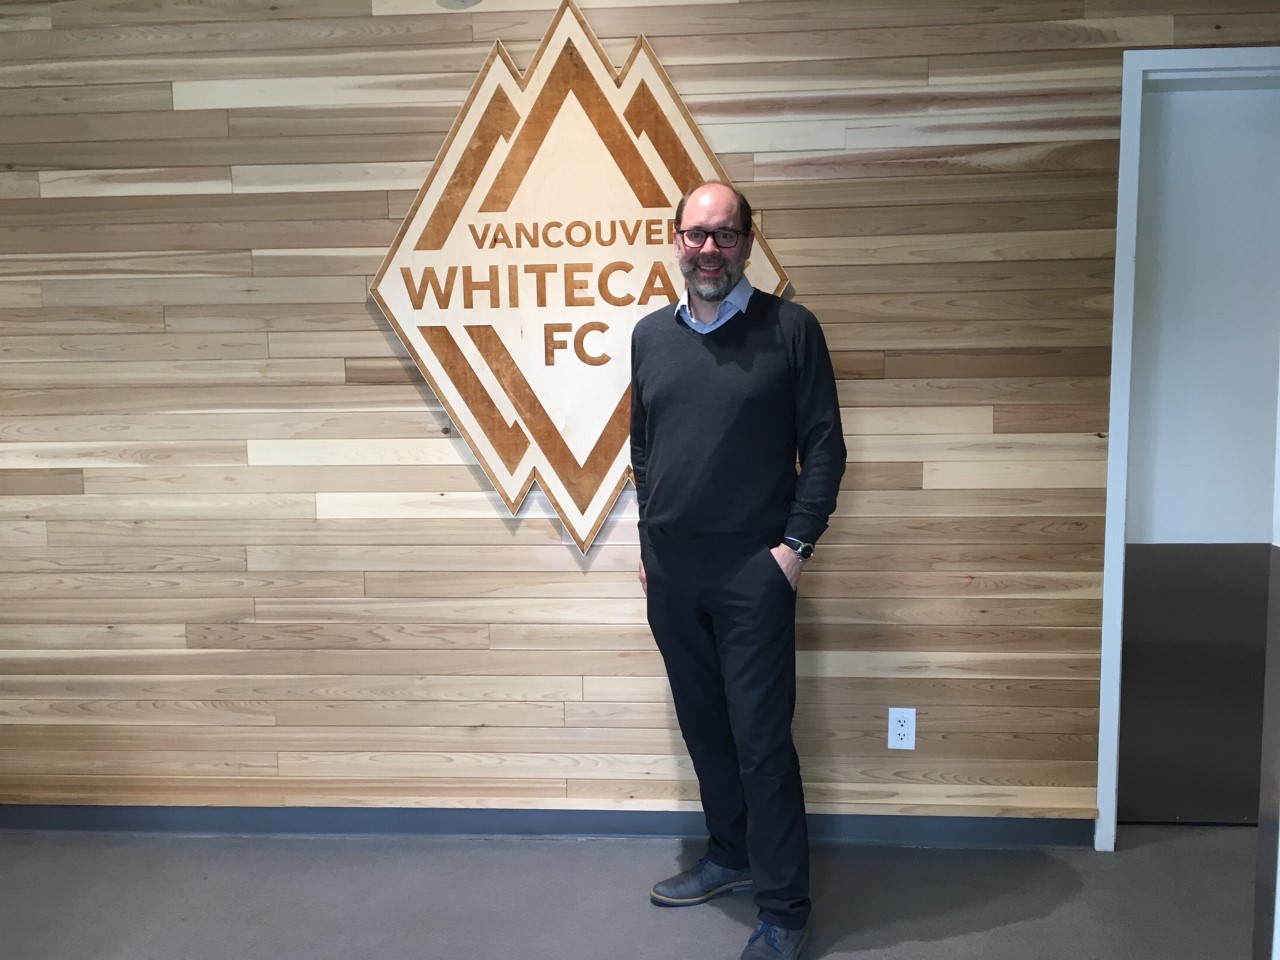 Introducing Alex Schuster, Sporting Director of the Whitecaps